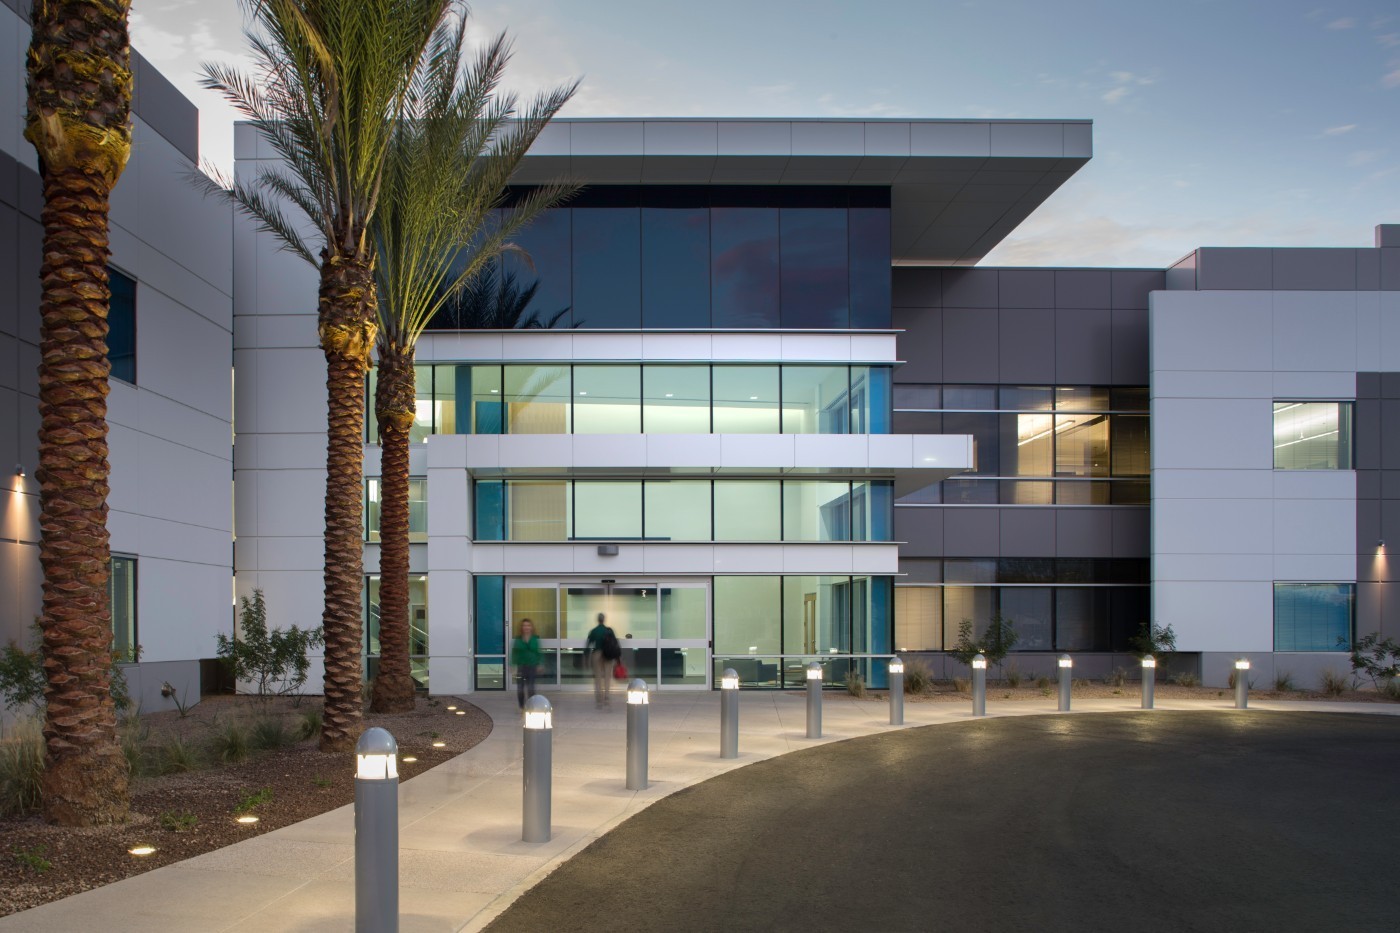 Headquartered in the greater Phoenix area, our office supports hundreds of on-site, hybrid and remote employees